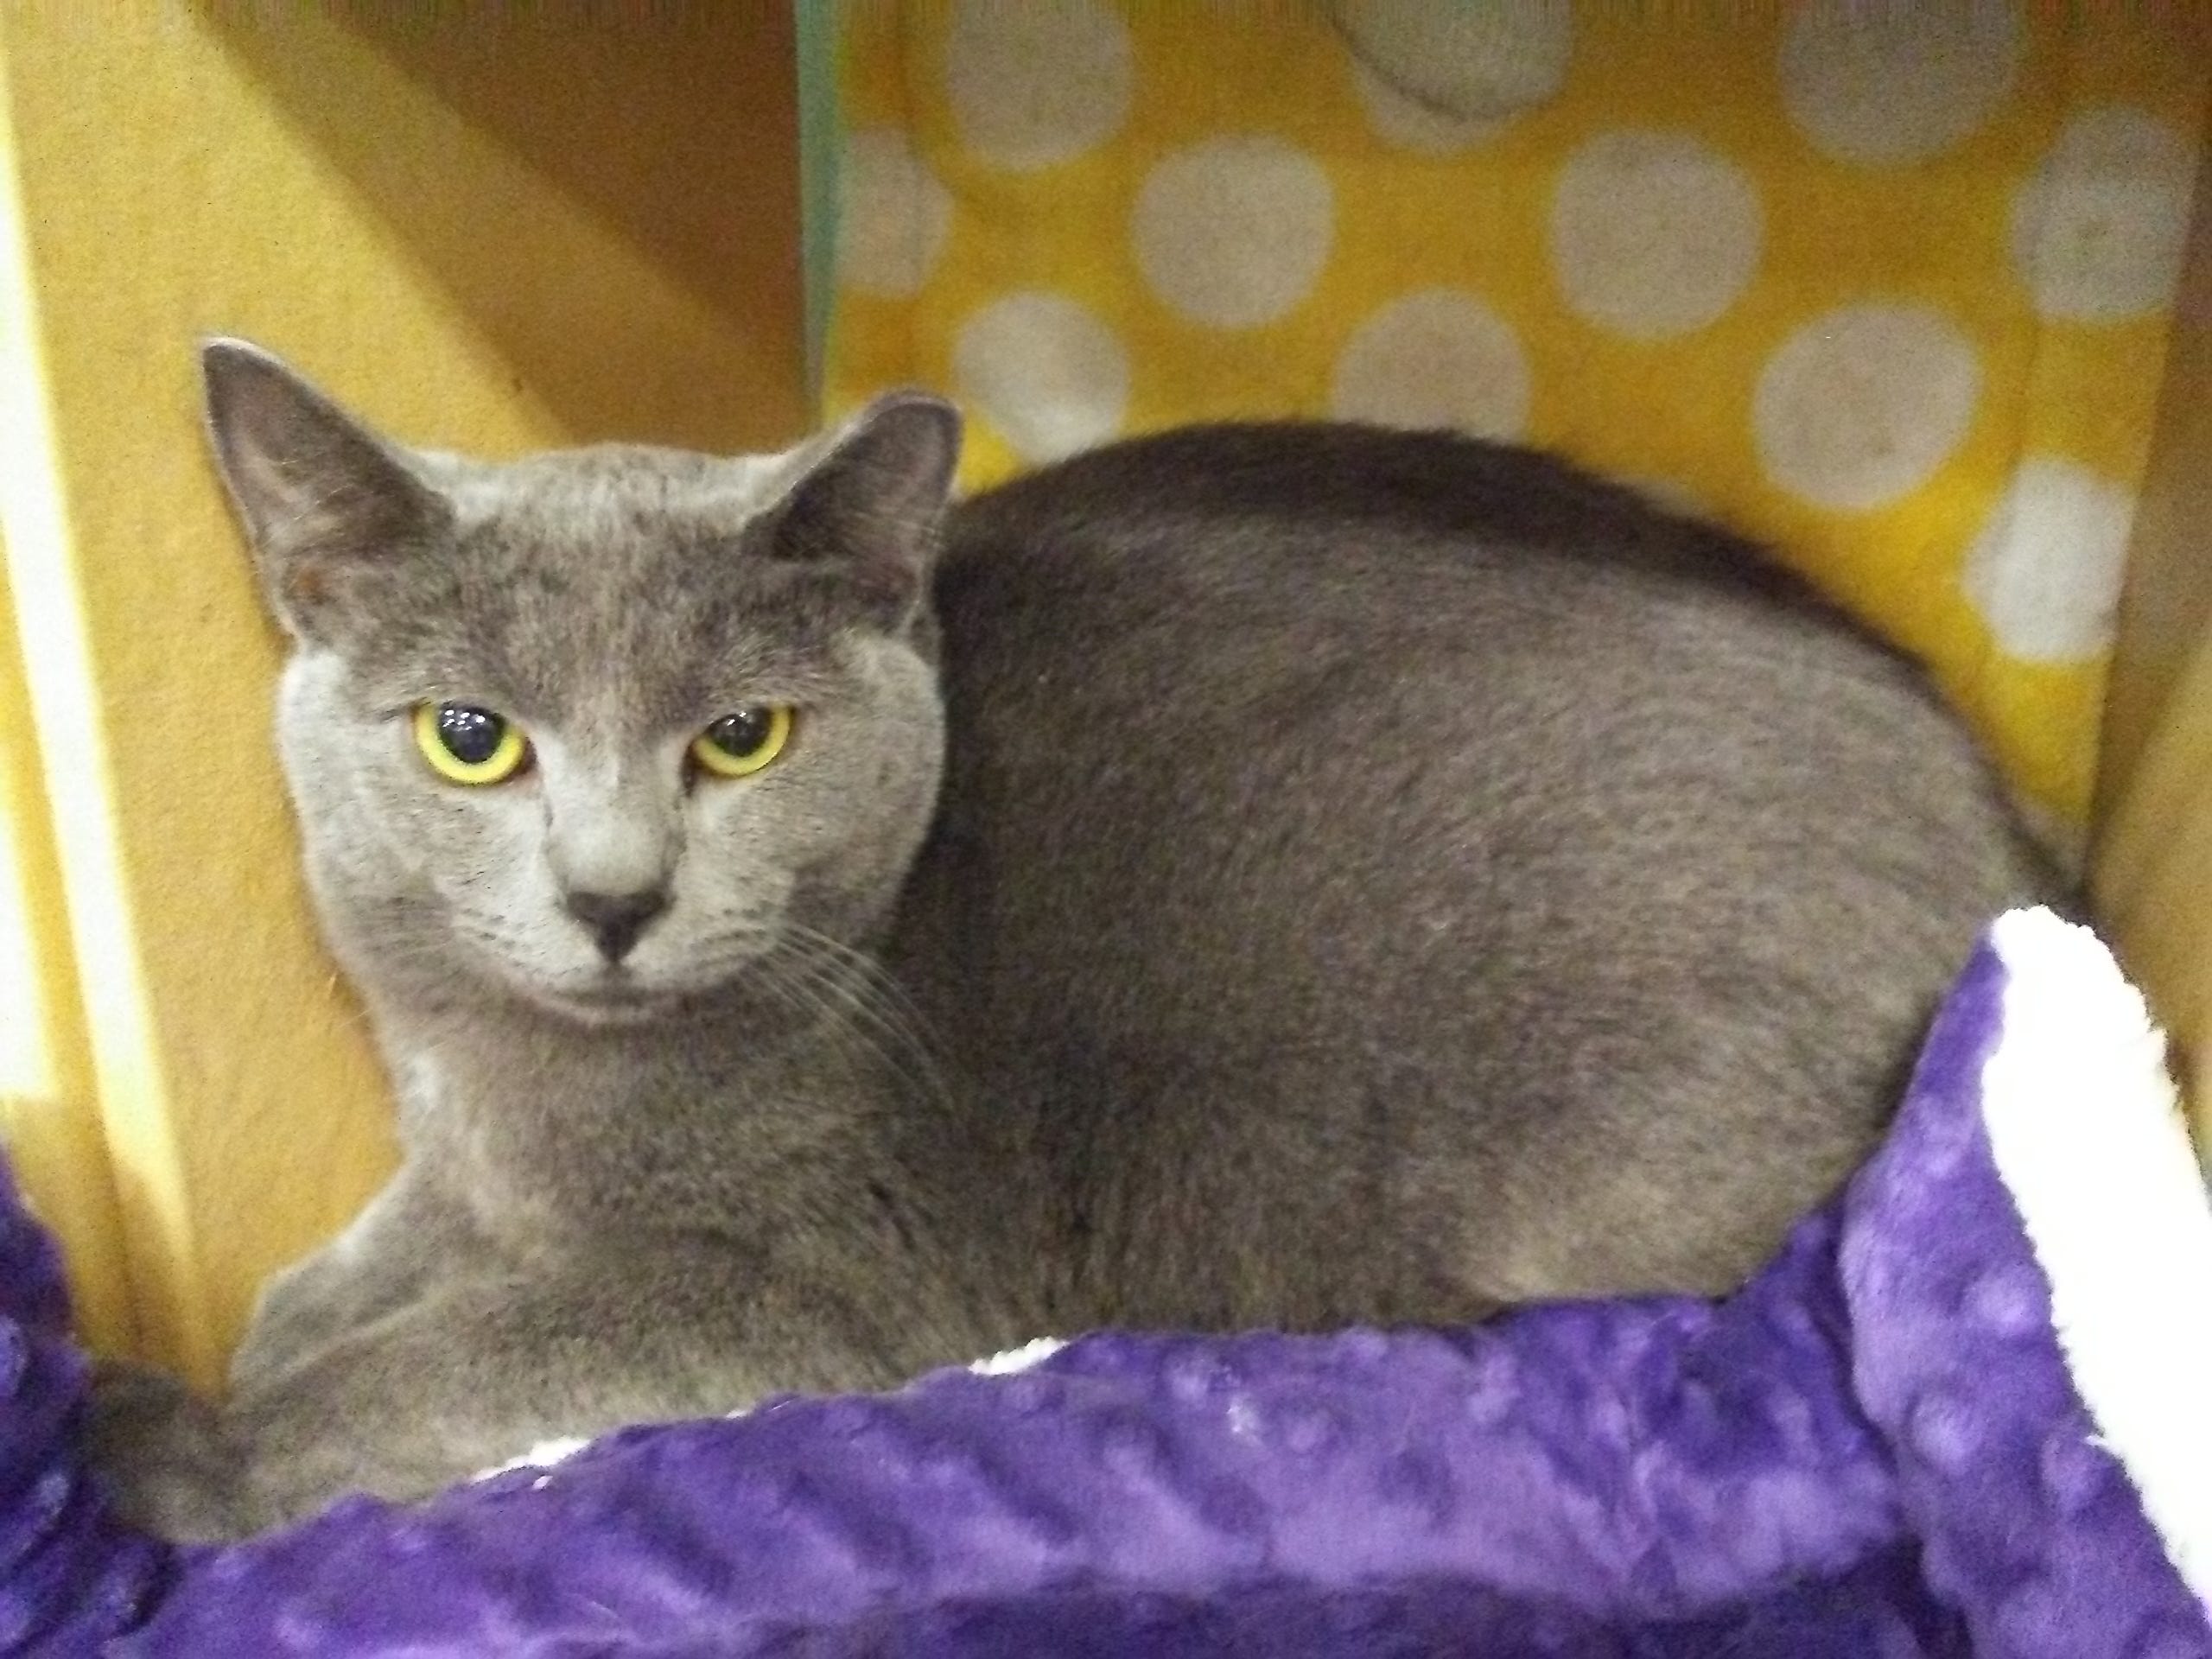 Max and Mila are twin 1-year-old, declawed gray kitties. We do not declaw pets, but sometimes we rescue cats who have already been declawed. All of our cats have been spayed or neutered, vaccinated, tested for FIV & FeLV, and microchipped. Our adoption fairs are 12-6 p.m. Saturday and 1-5 p.m. Sunday at Westown Petsmart, 214 Morrell Road. Info: www.feralfelinefriends.org.